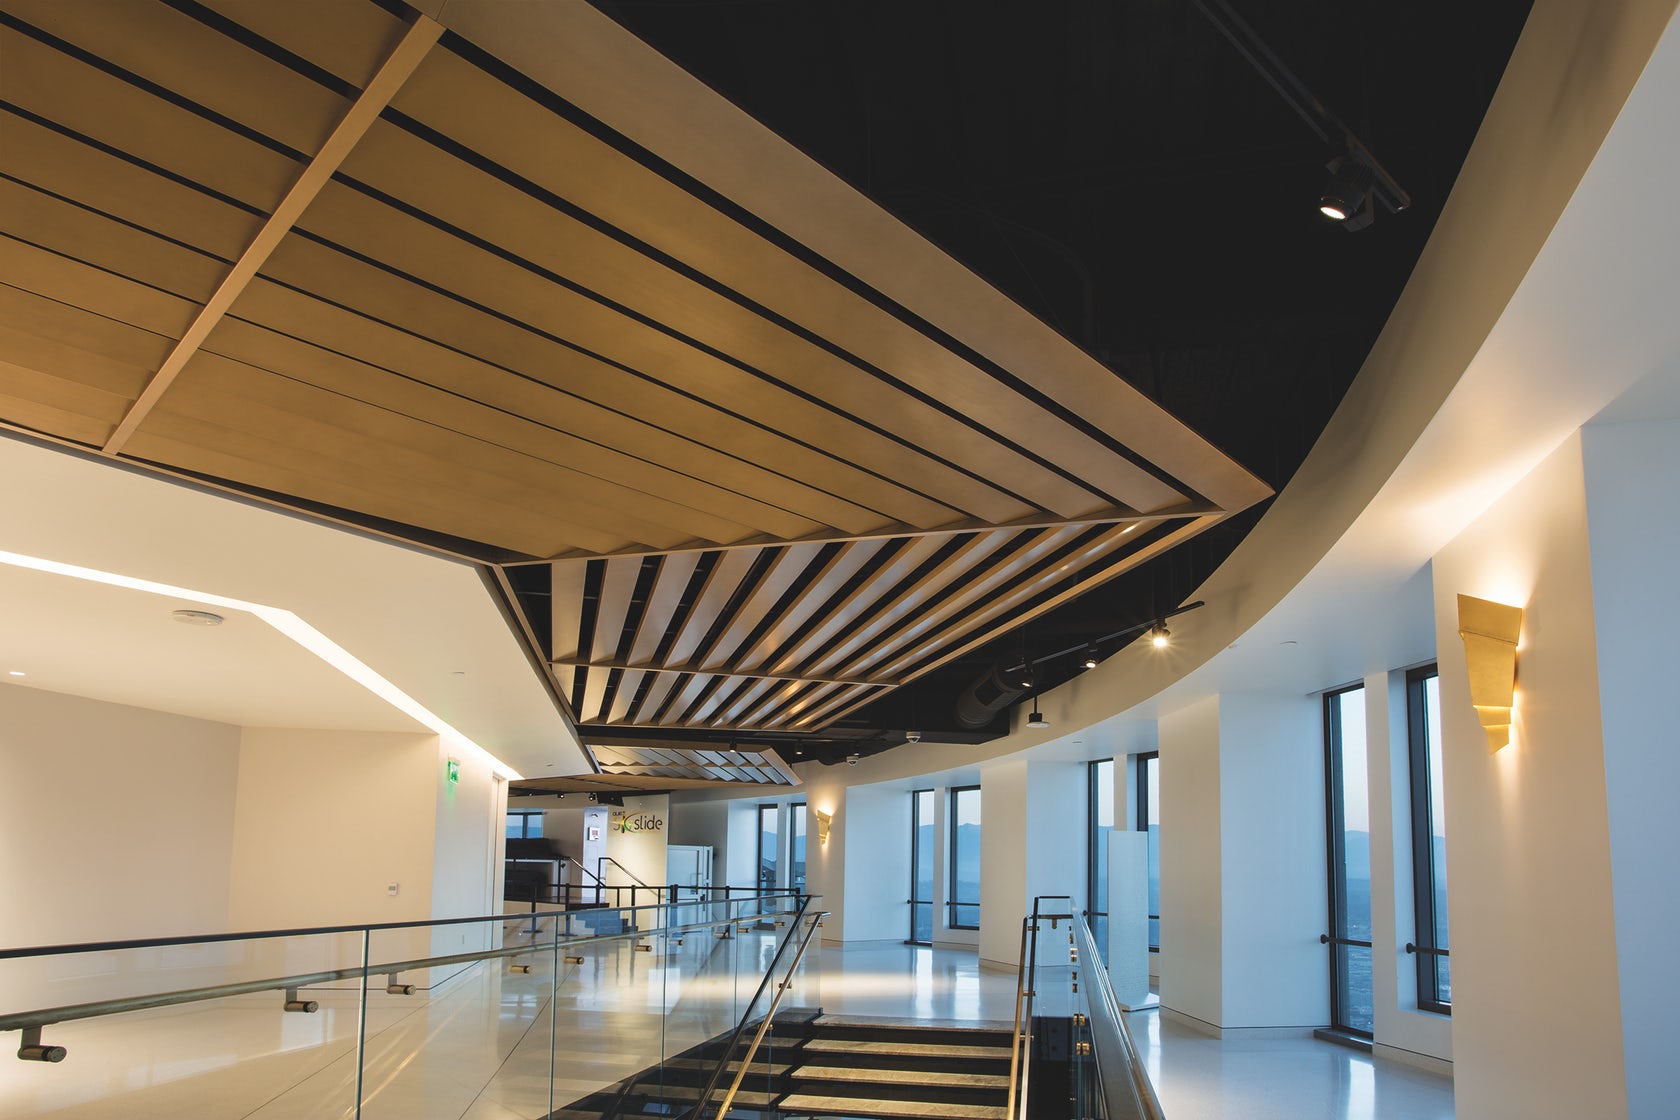 Armstrong Ceiling Solutions Provide Endless Options In Creative Acoustics For Architects Architizer Journal